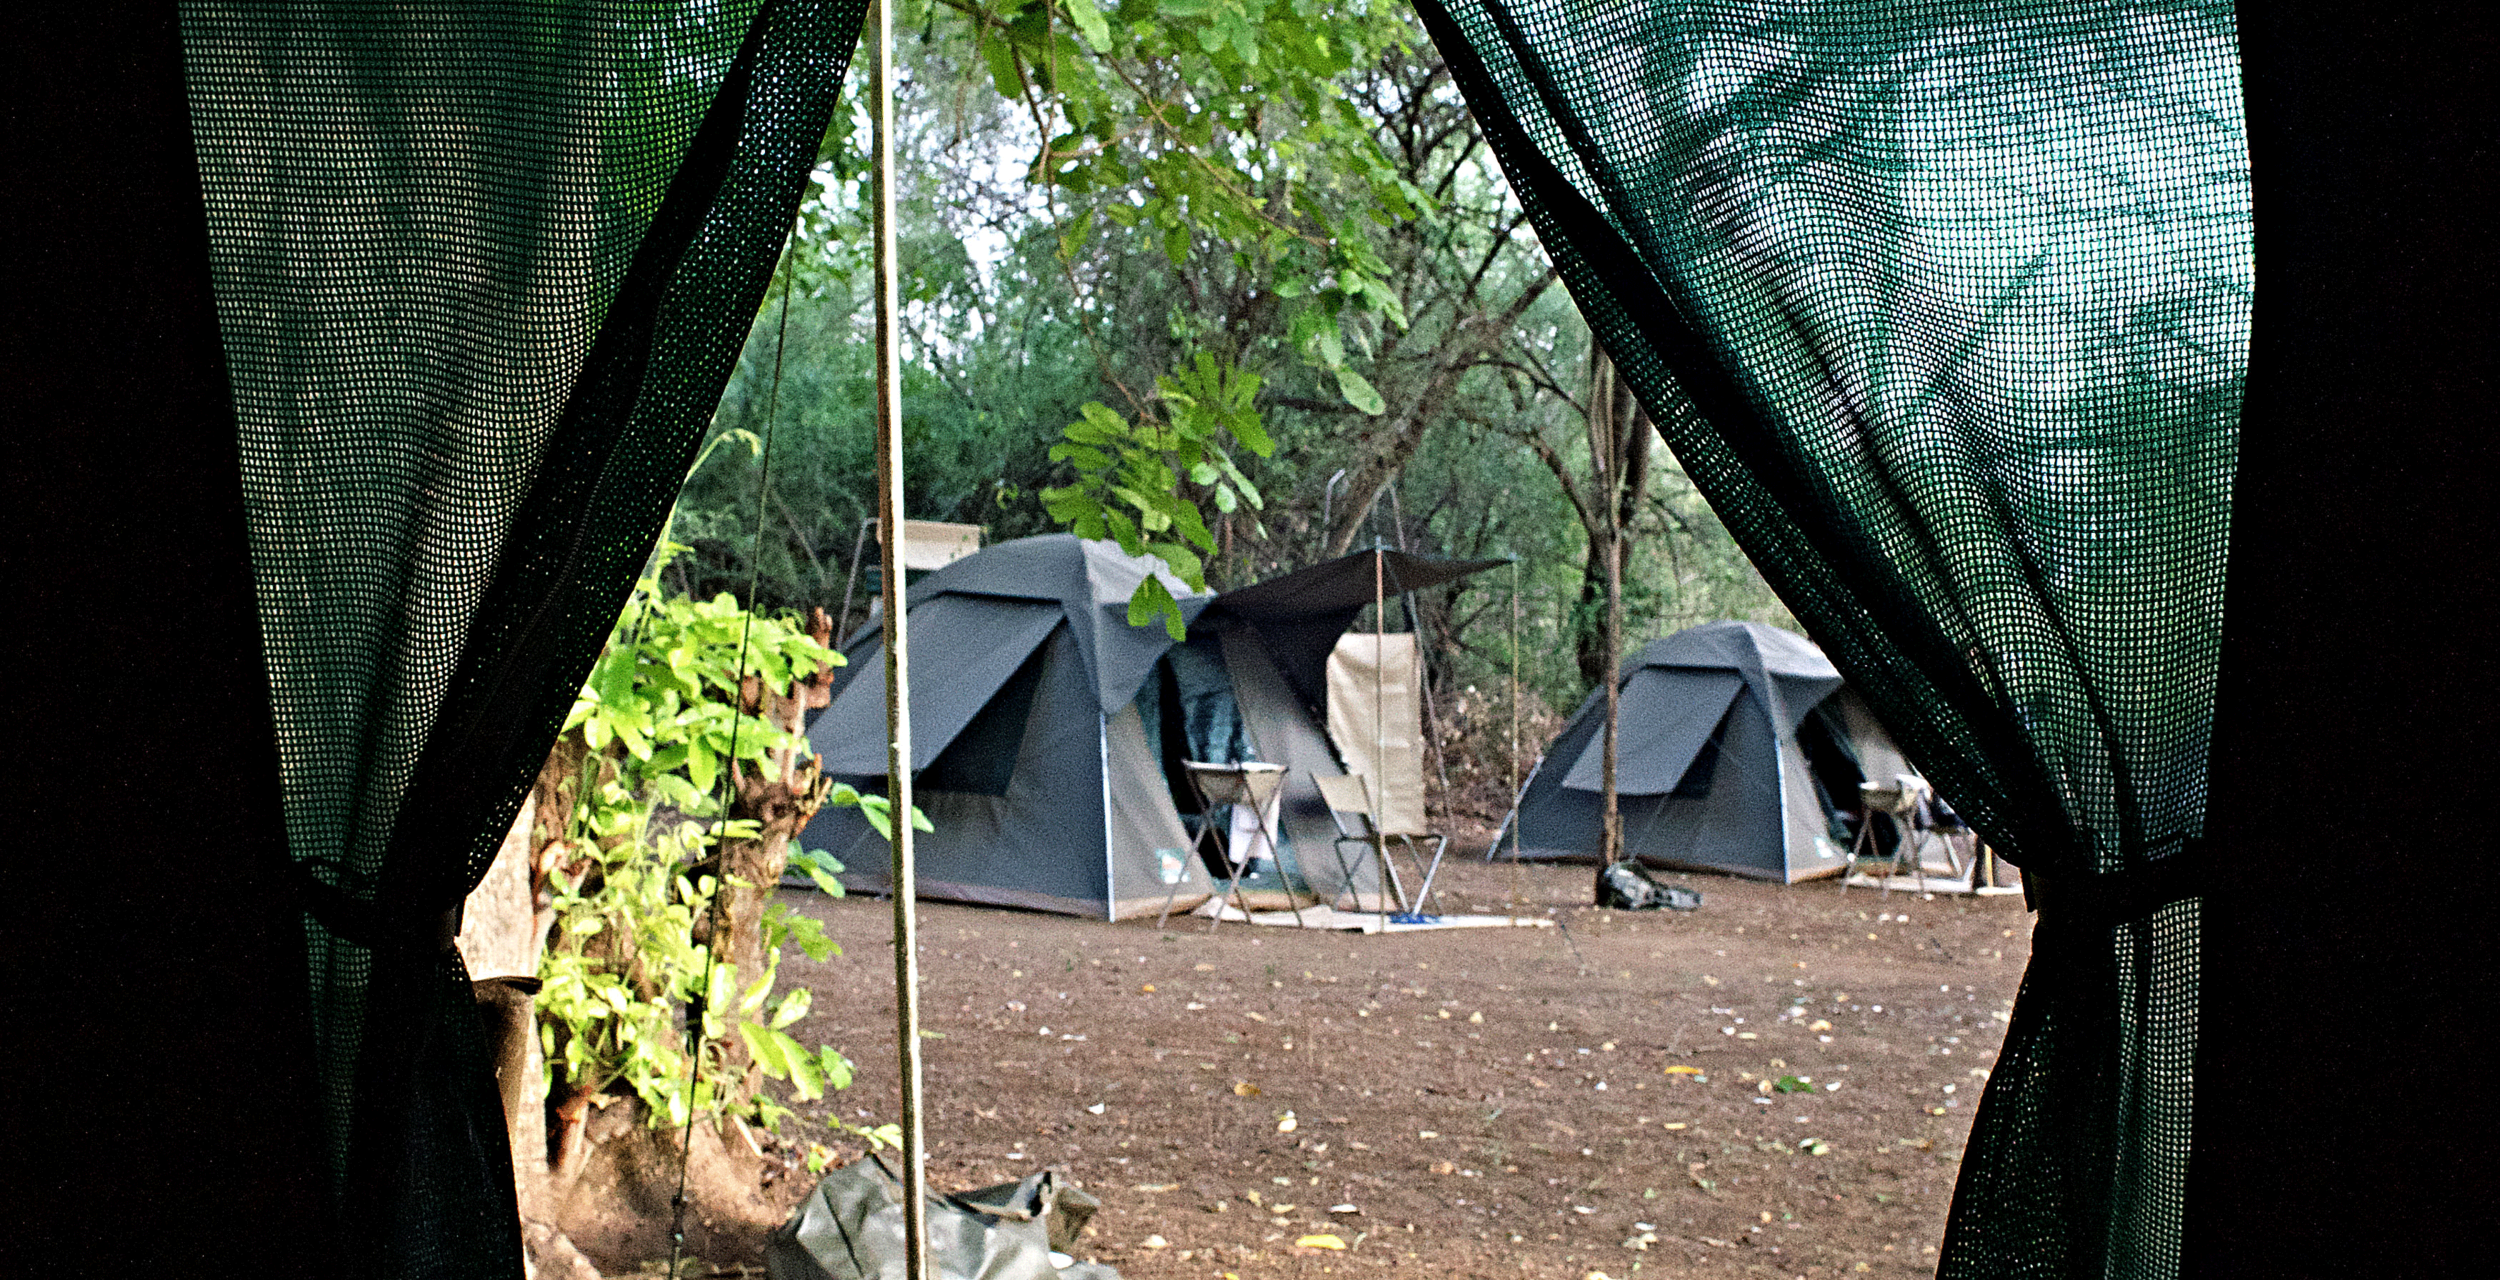 Mursi-Fly-Camp-Omo-River-Ethiopia-2017.png